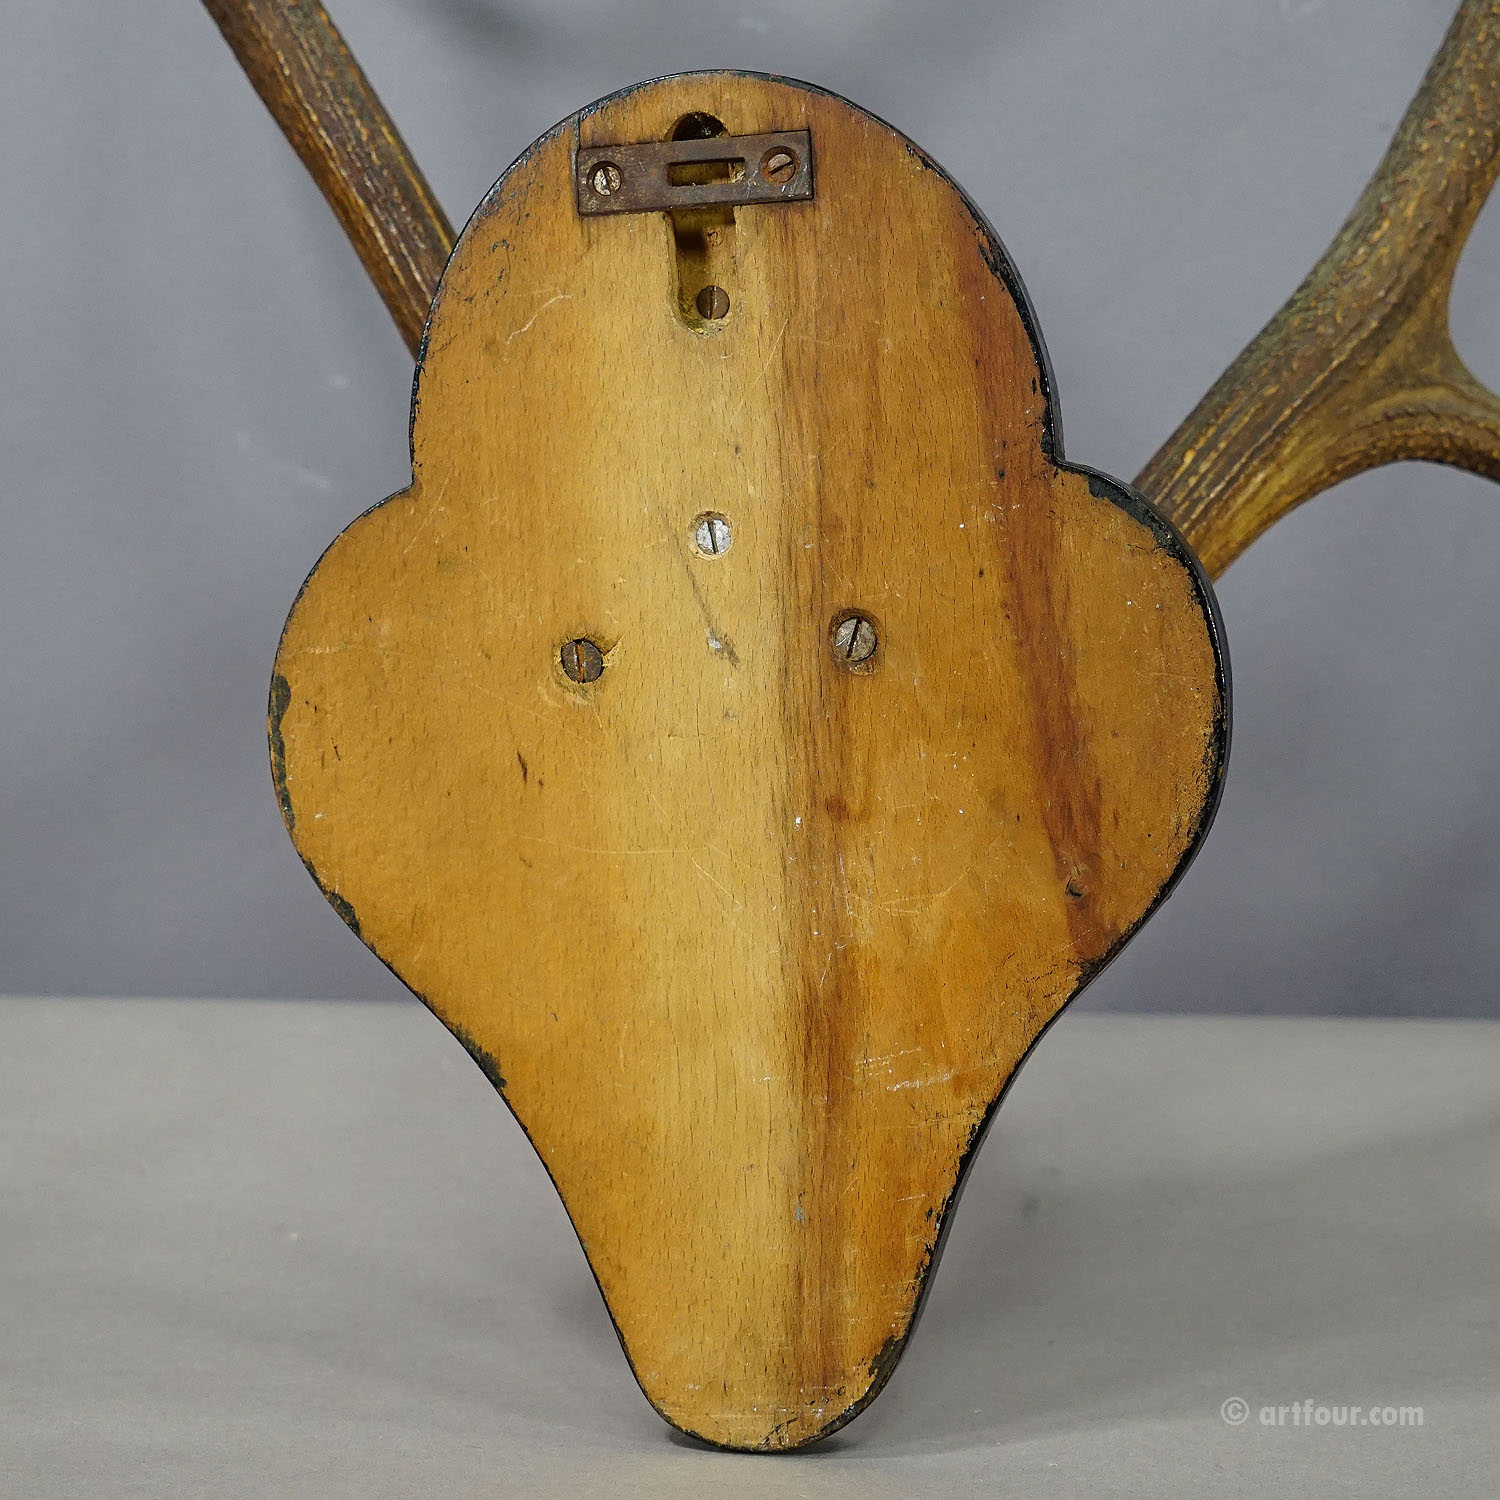 Abnorm Black Forest Deer Trophy on wooden plaque  - Germany ca. 1900